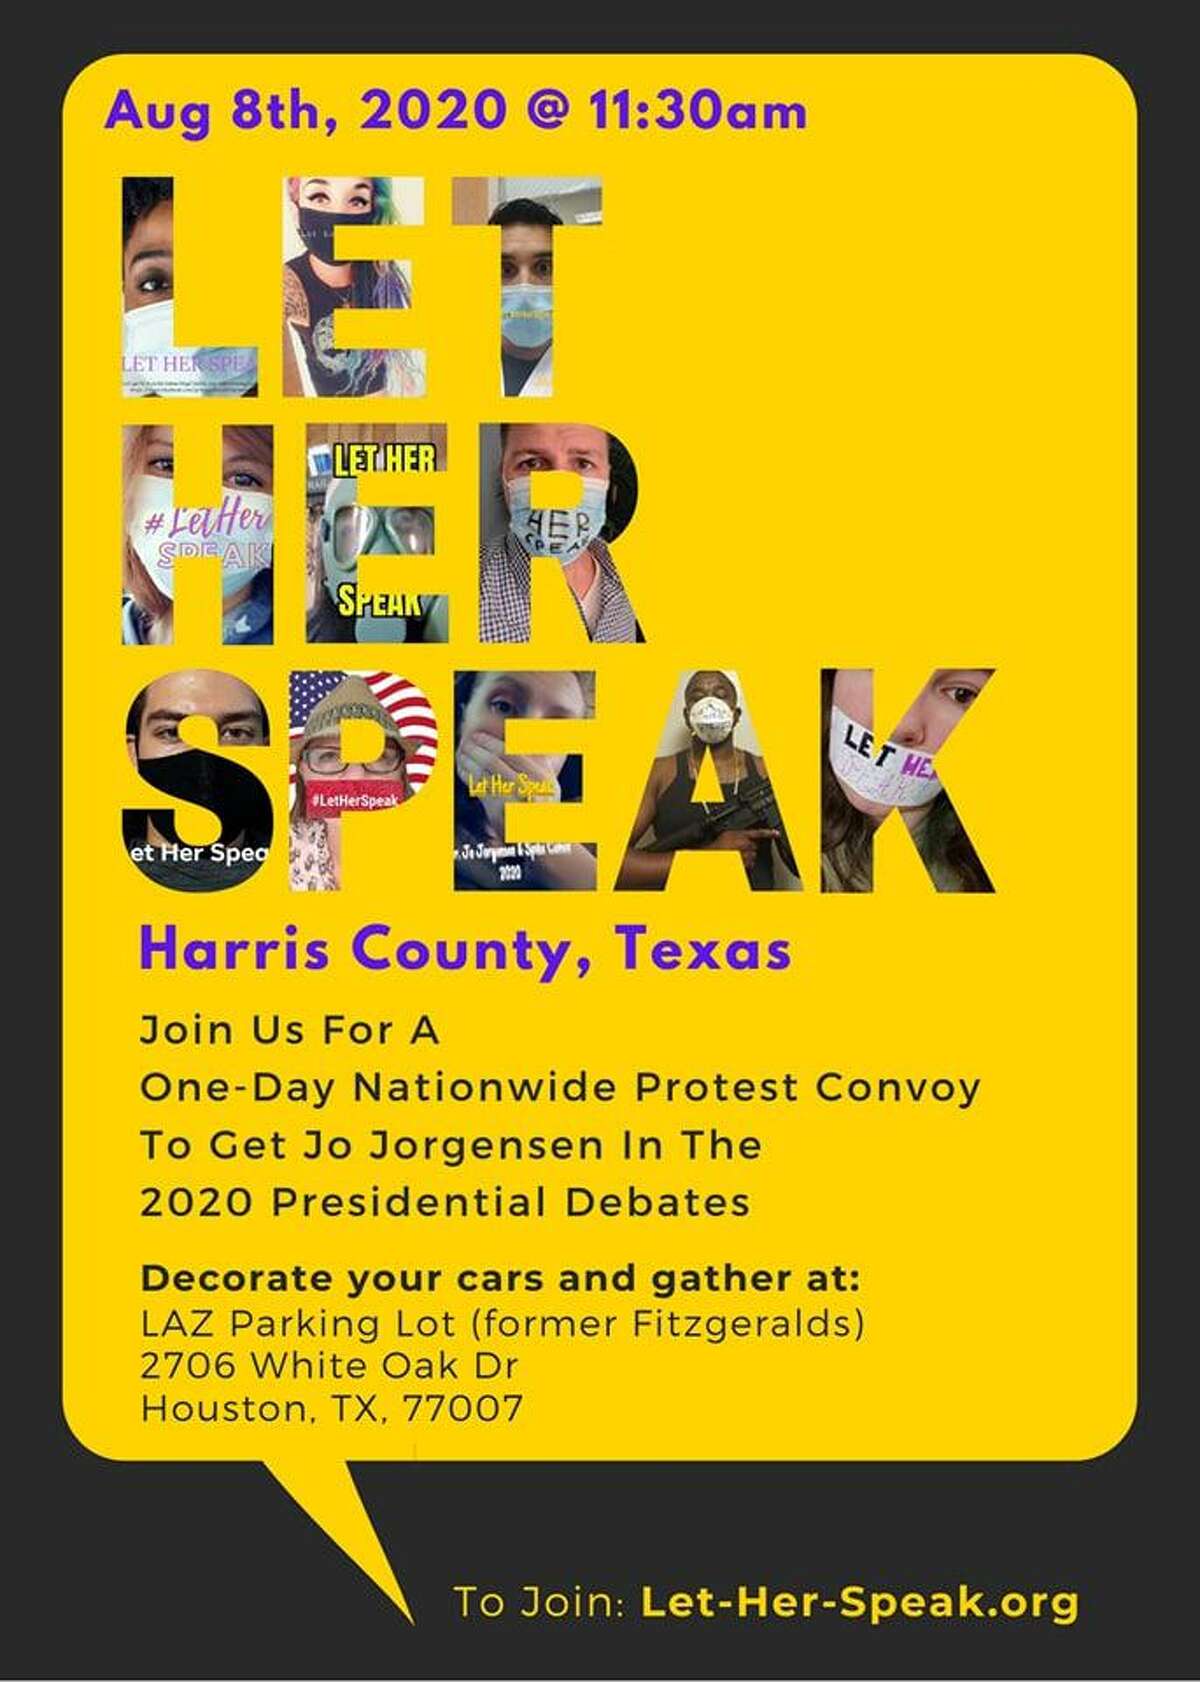 Harris County Libertarian Party is making their voice heard with #letherspeak protest